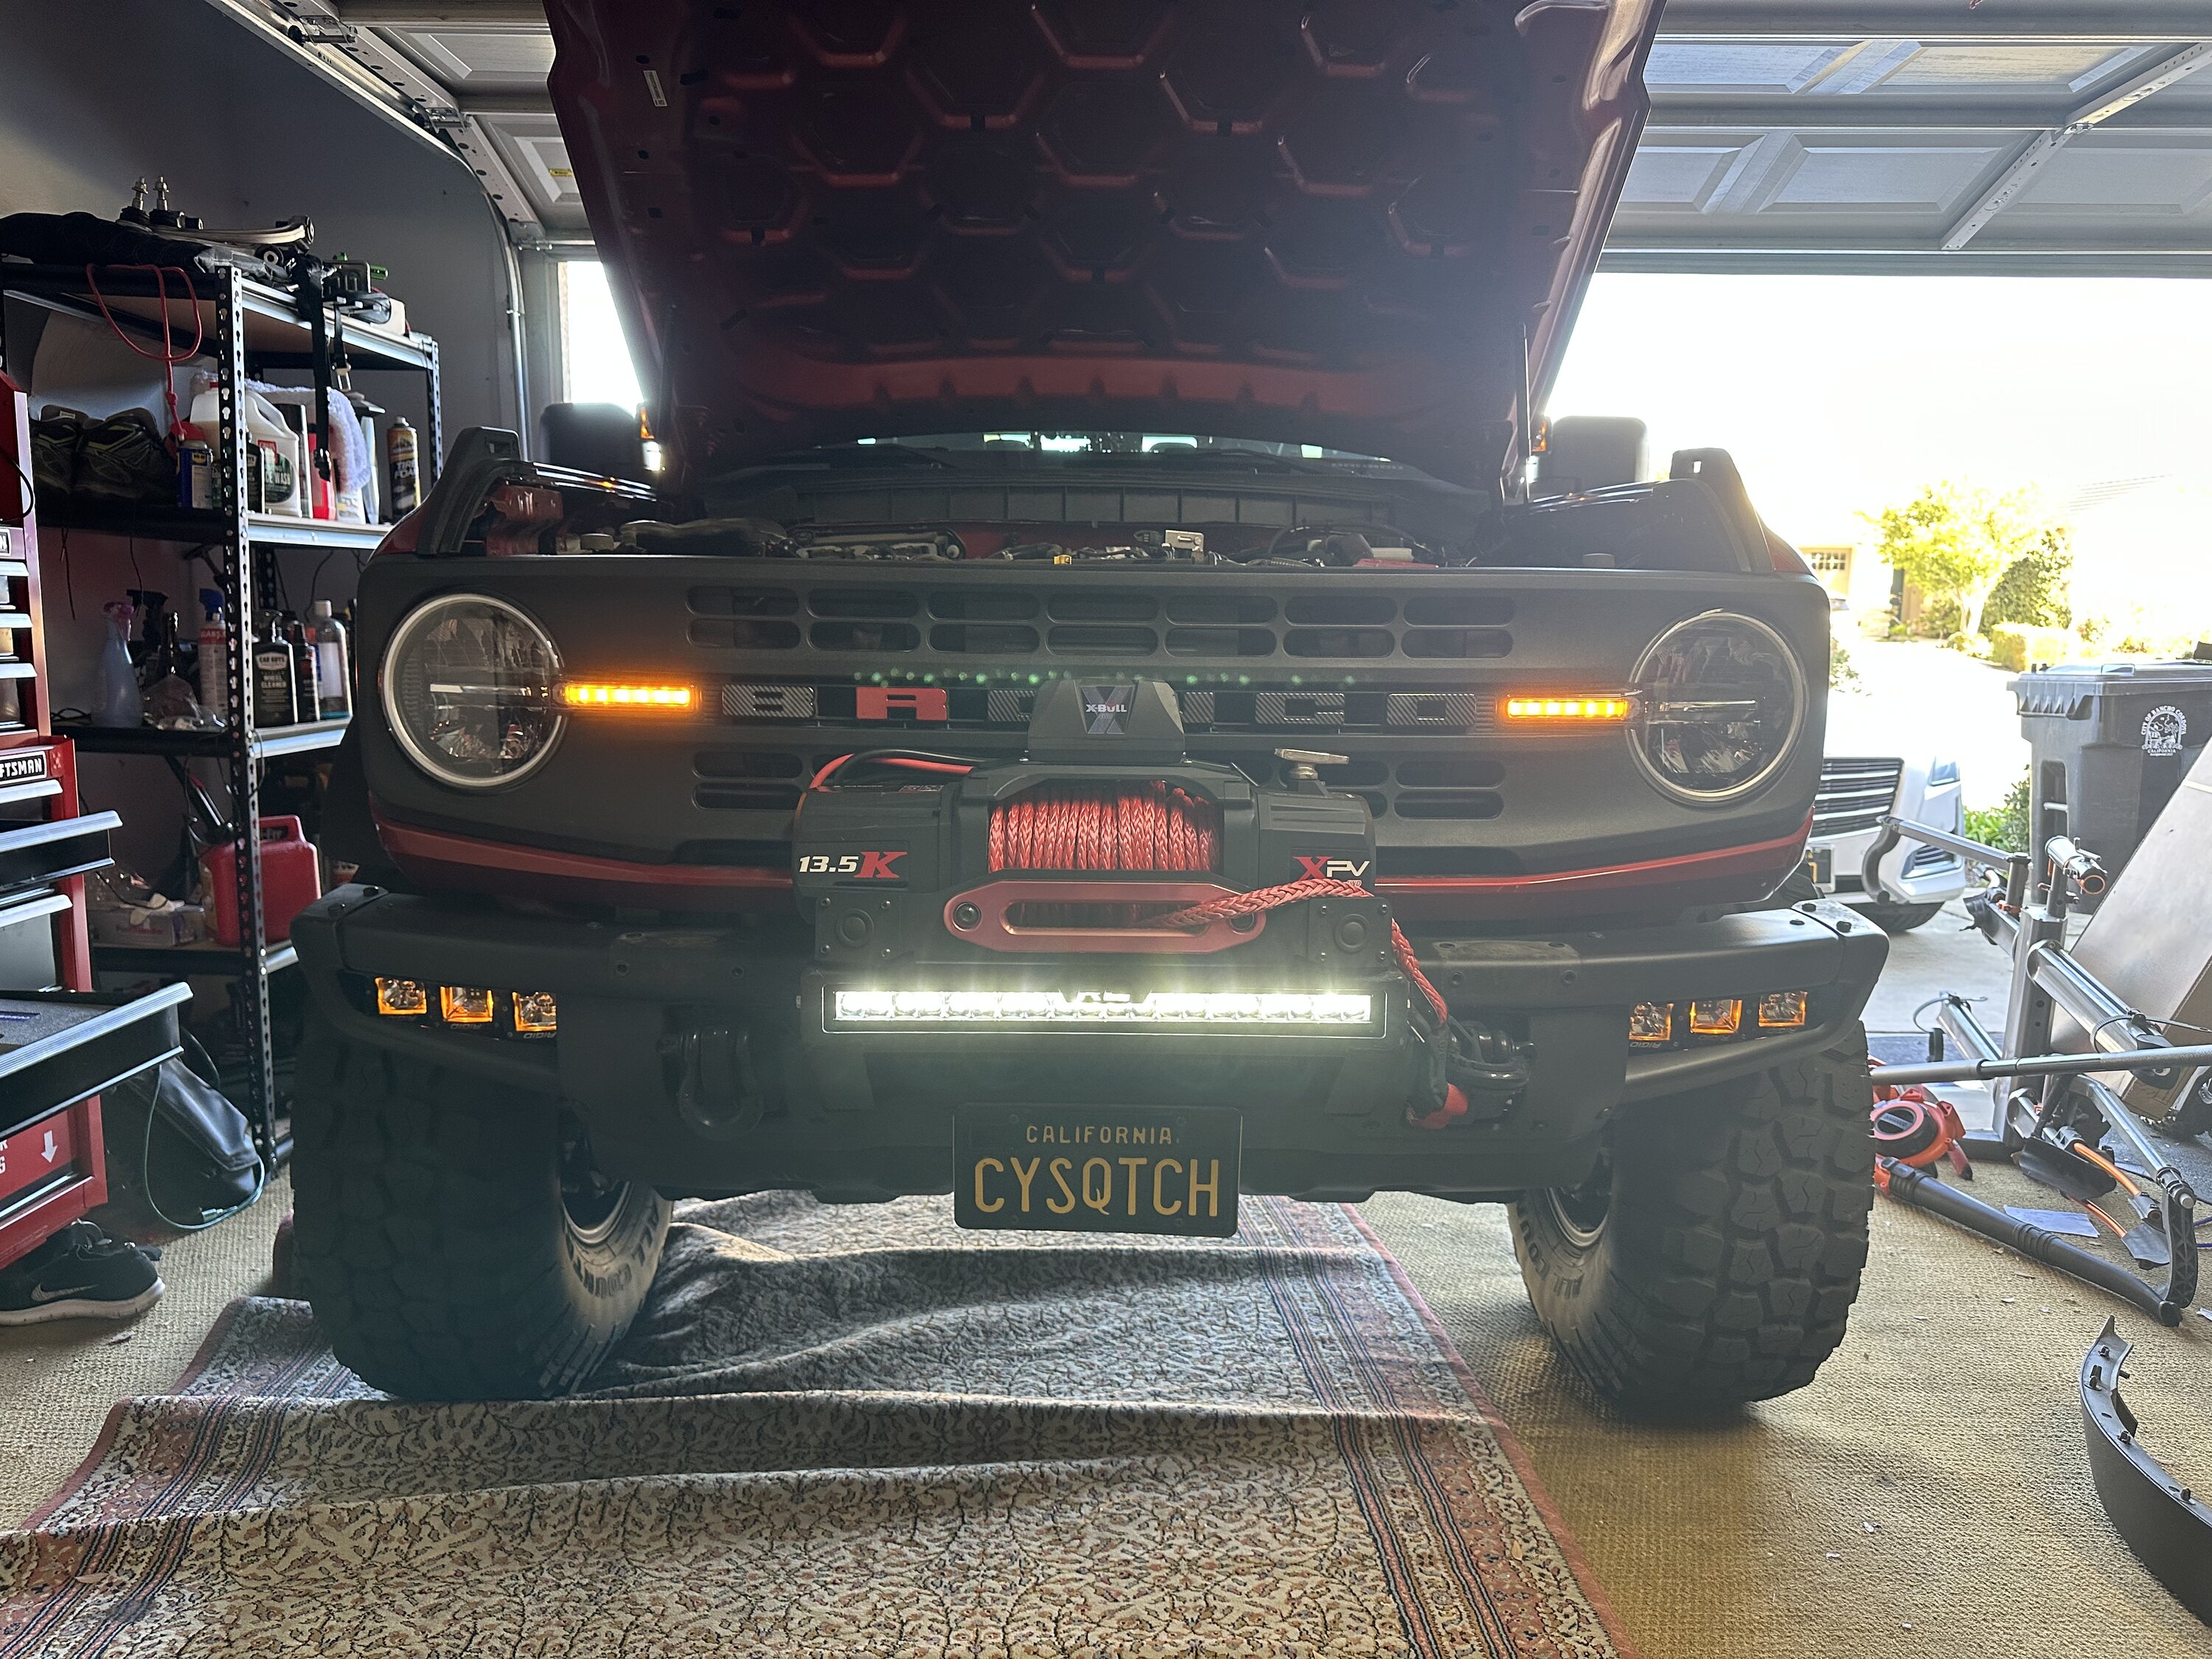 Ford Bronco First Look! ORACLE Lighting Oculus™ Bi-LED Headlights for 2021+ Ford Bronco 1AFEF895-084B-4B75-899E-2999FC7C1CC4